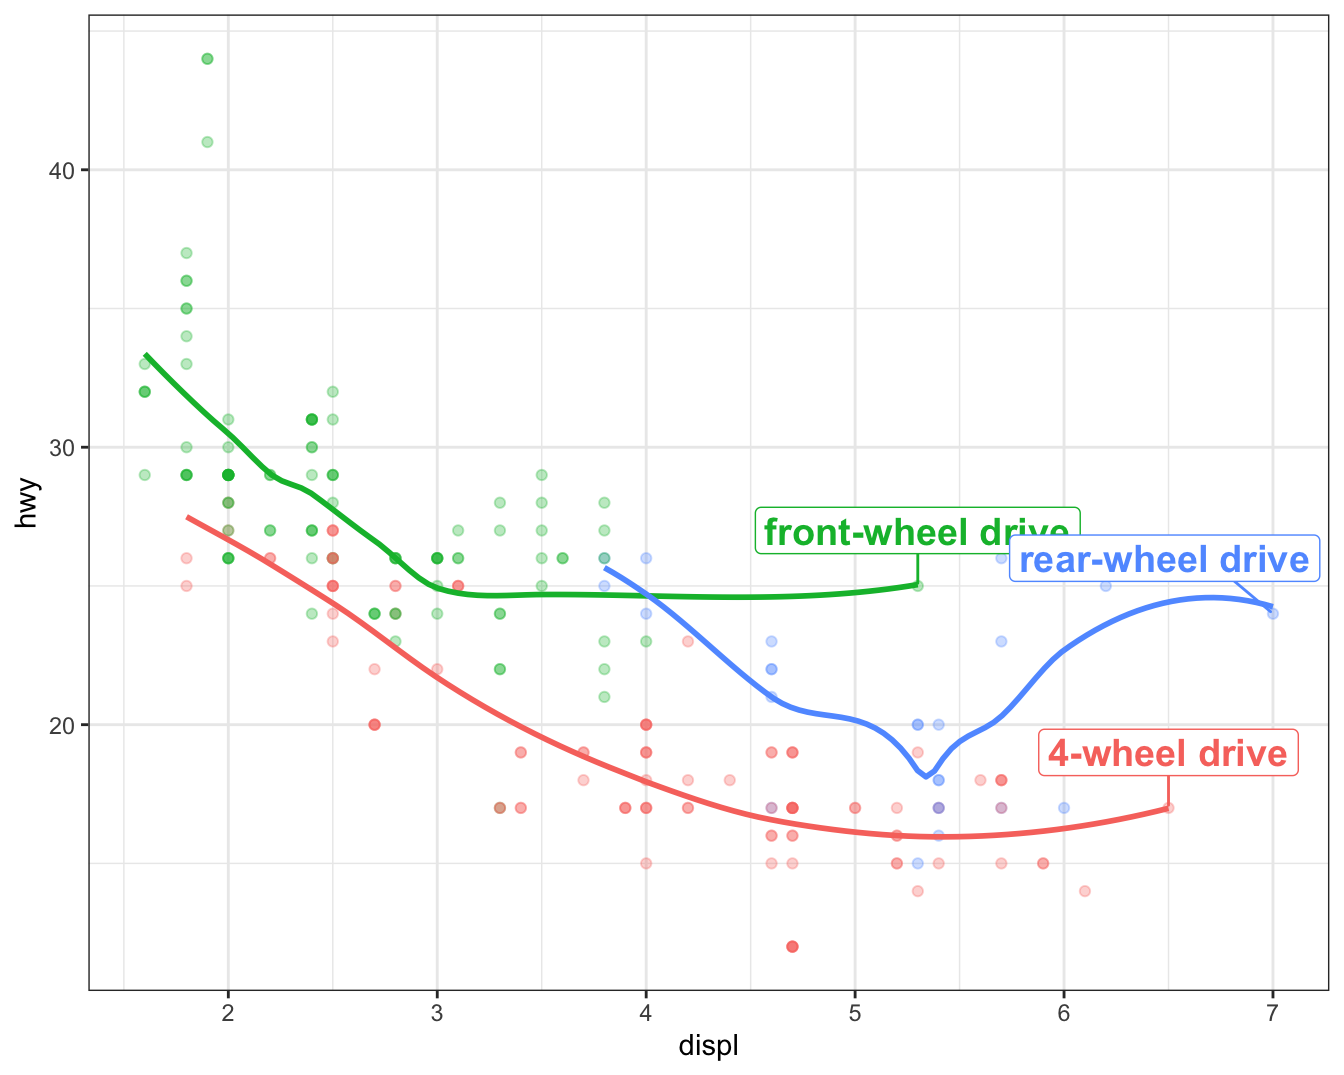 Scatterplot of highway fuel efficiency versus engine size of cars, where
points are colored according to the car class. Some points are labelled
with the car's name. The labels are box with white, transparent background
and positioned to not overlap.